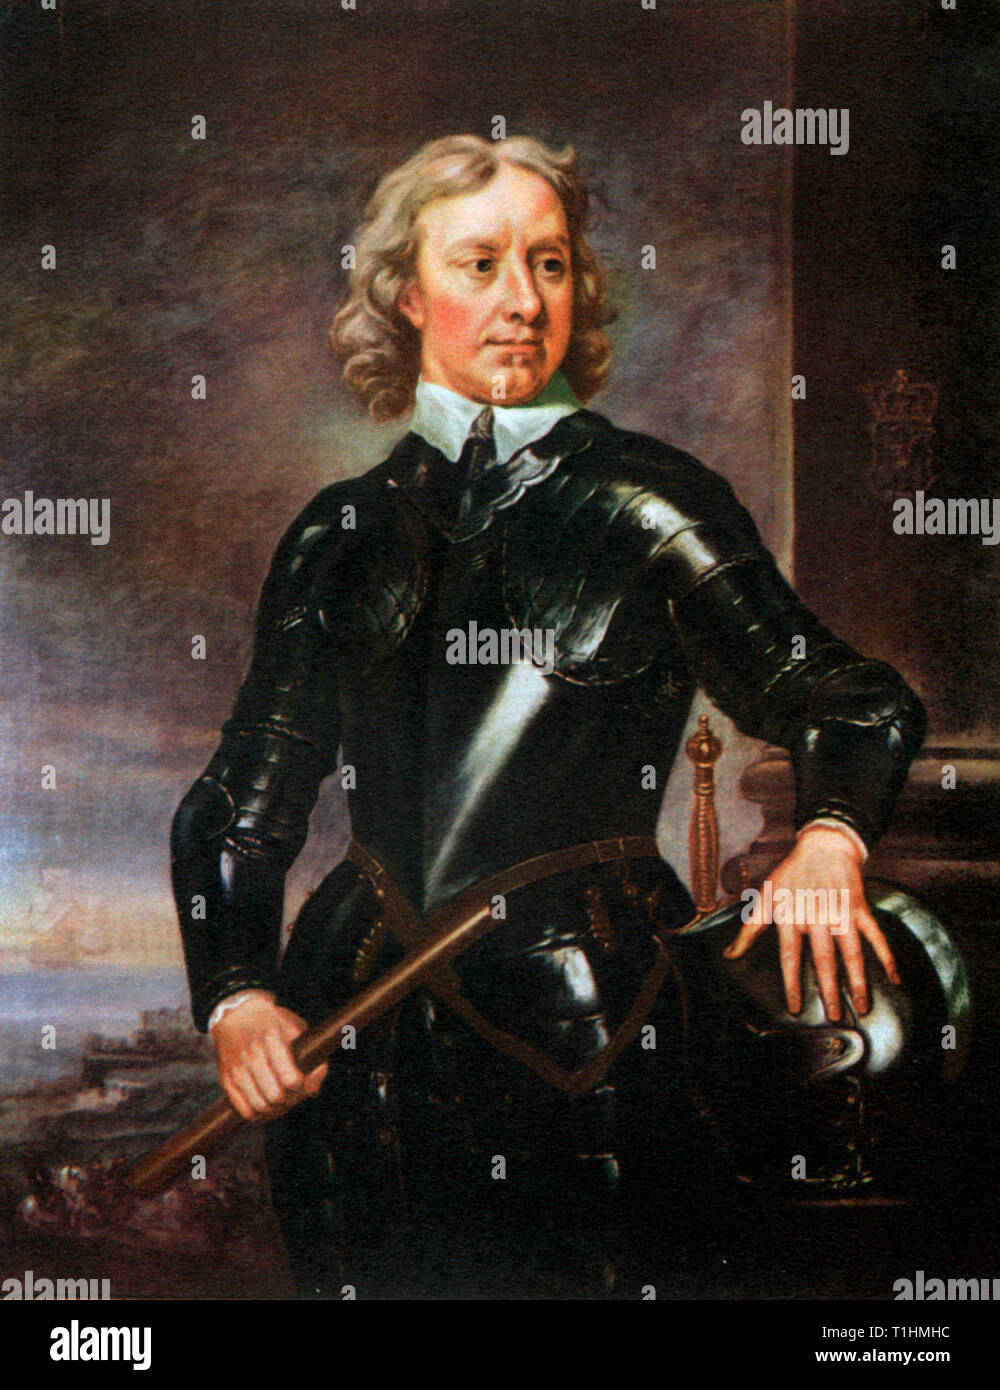 Oliver Cromwell (1599-1698). After Samuel Cooper (1609-1672). Oliver Cromwell, English military and political leader and later Lord Protector of the Commonwealth of England, Scotland and Ireland. Cromwell was a central figure in the English Civil War leading the Parliamentarians otherwise known as the 'Roudheads'. Stock Photo